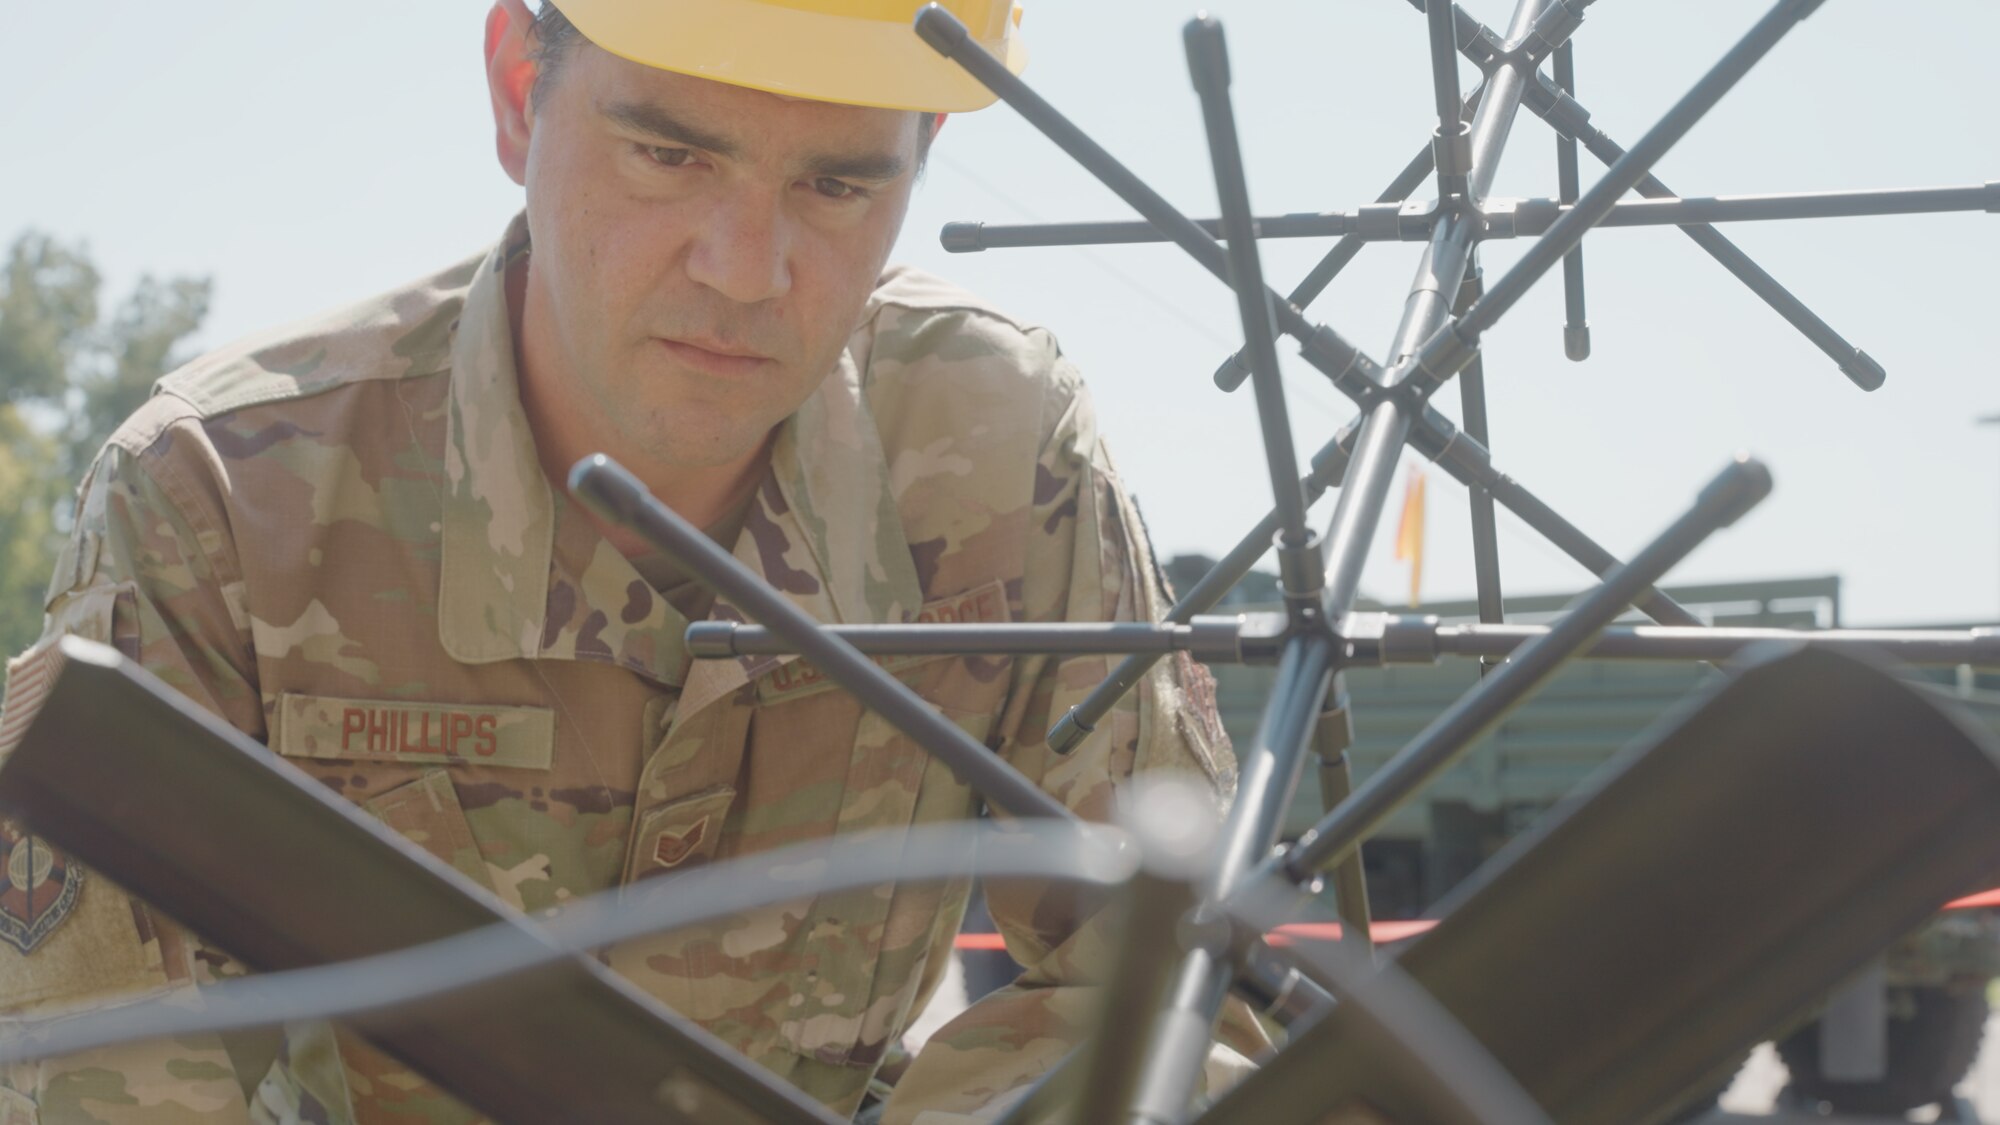 Staff Sgt. Nathaniel Phillips, a cyber systems operator for the 226th Communications, inspects a satellite during Exercise Copperhead Beacon 23 at the group’s headquarters in Montgomery, Alabama, on September 8, 2023.